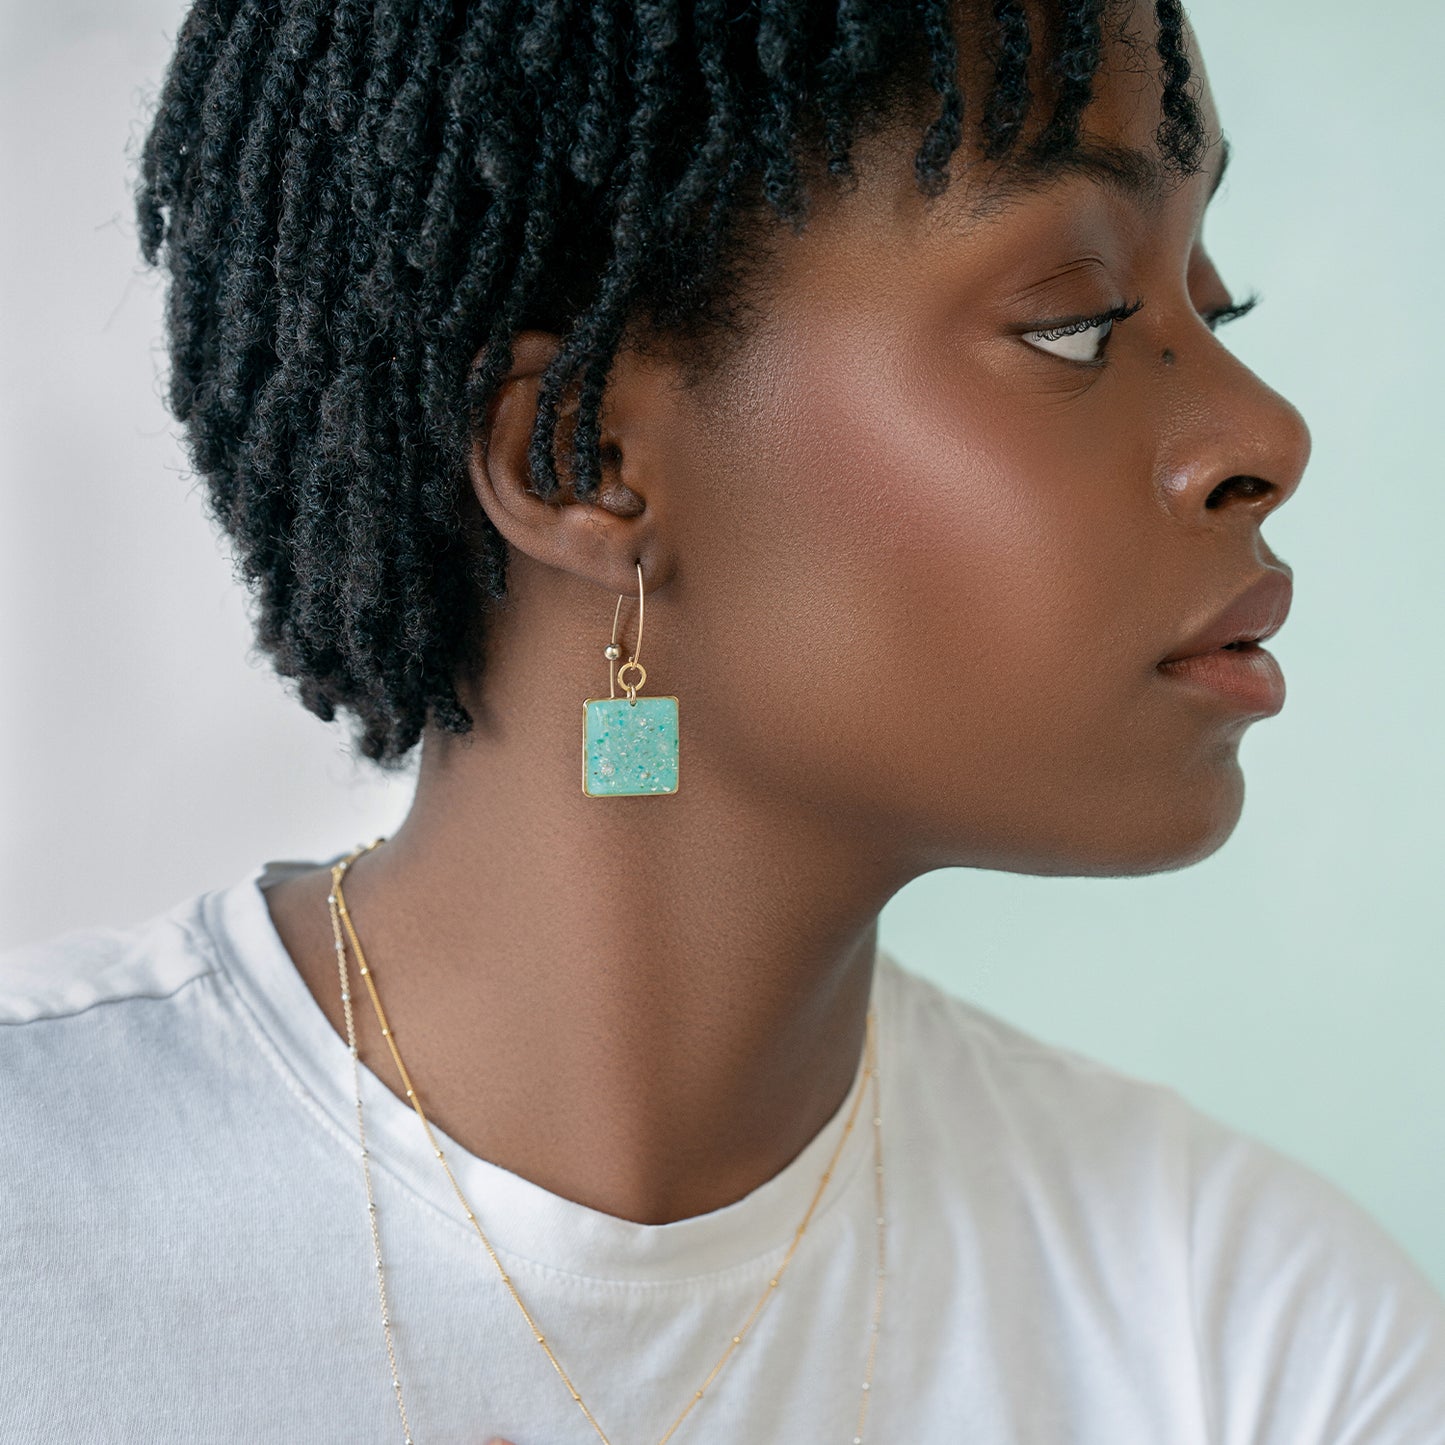 Statement Dangling Square Blue Earrings